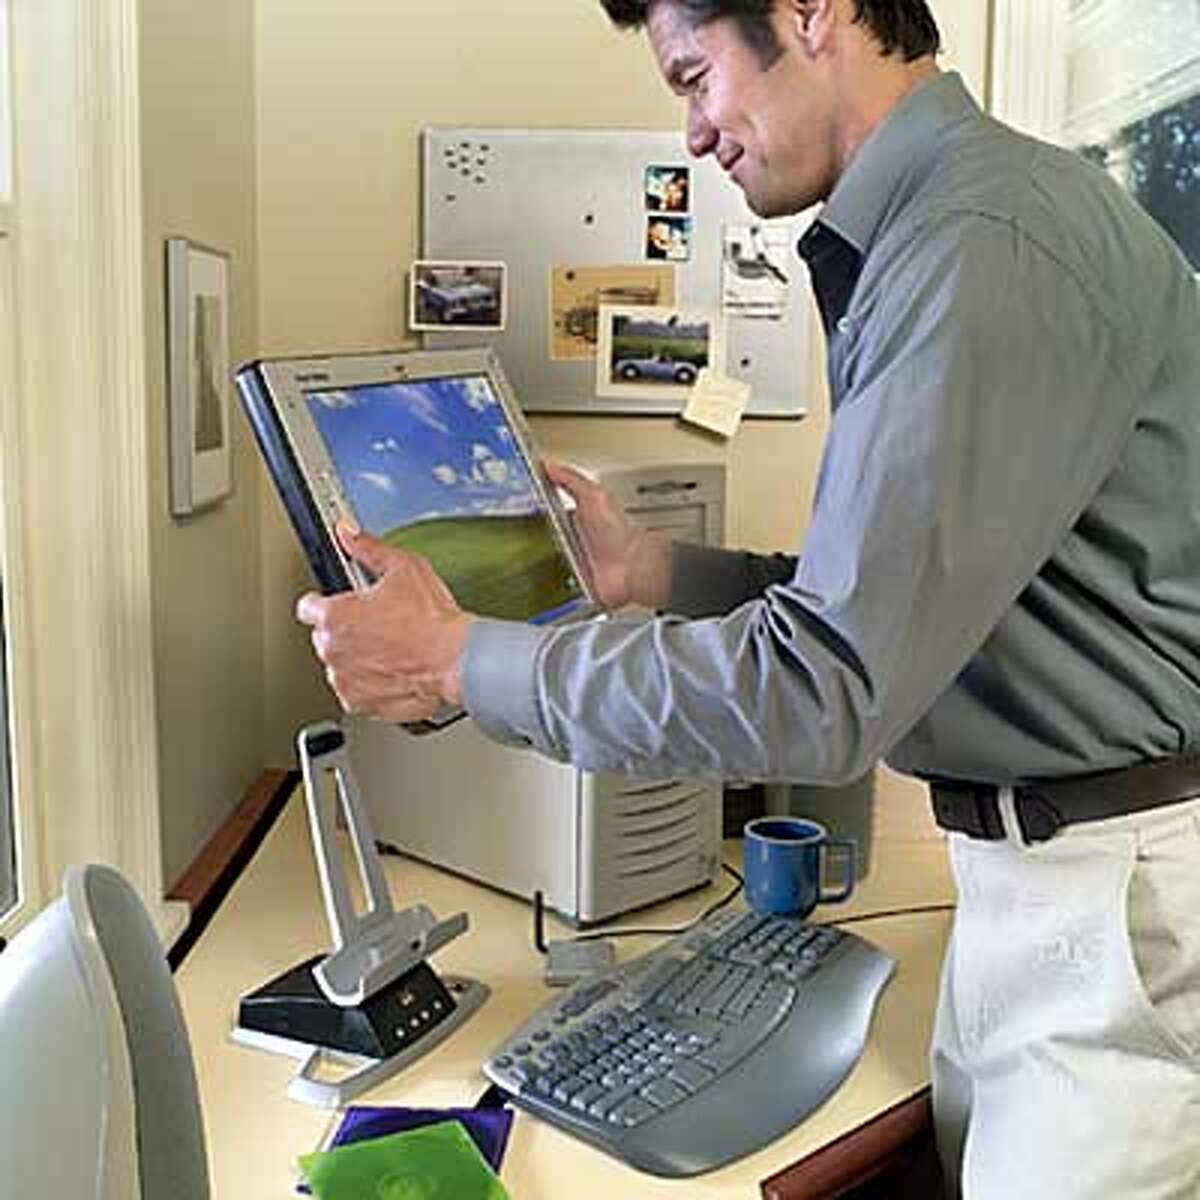 ViewSonic's airpanel monitors are completely wireless and portable. HANDOUT PHOTO